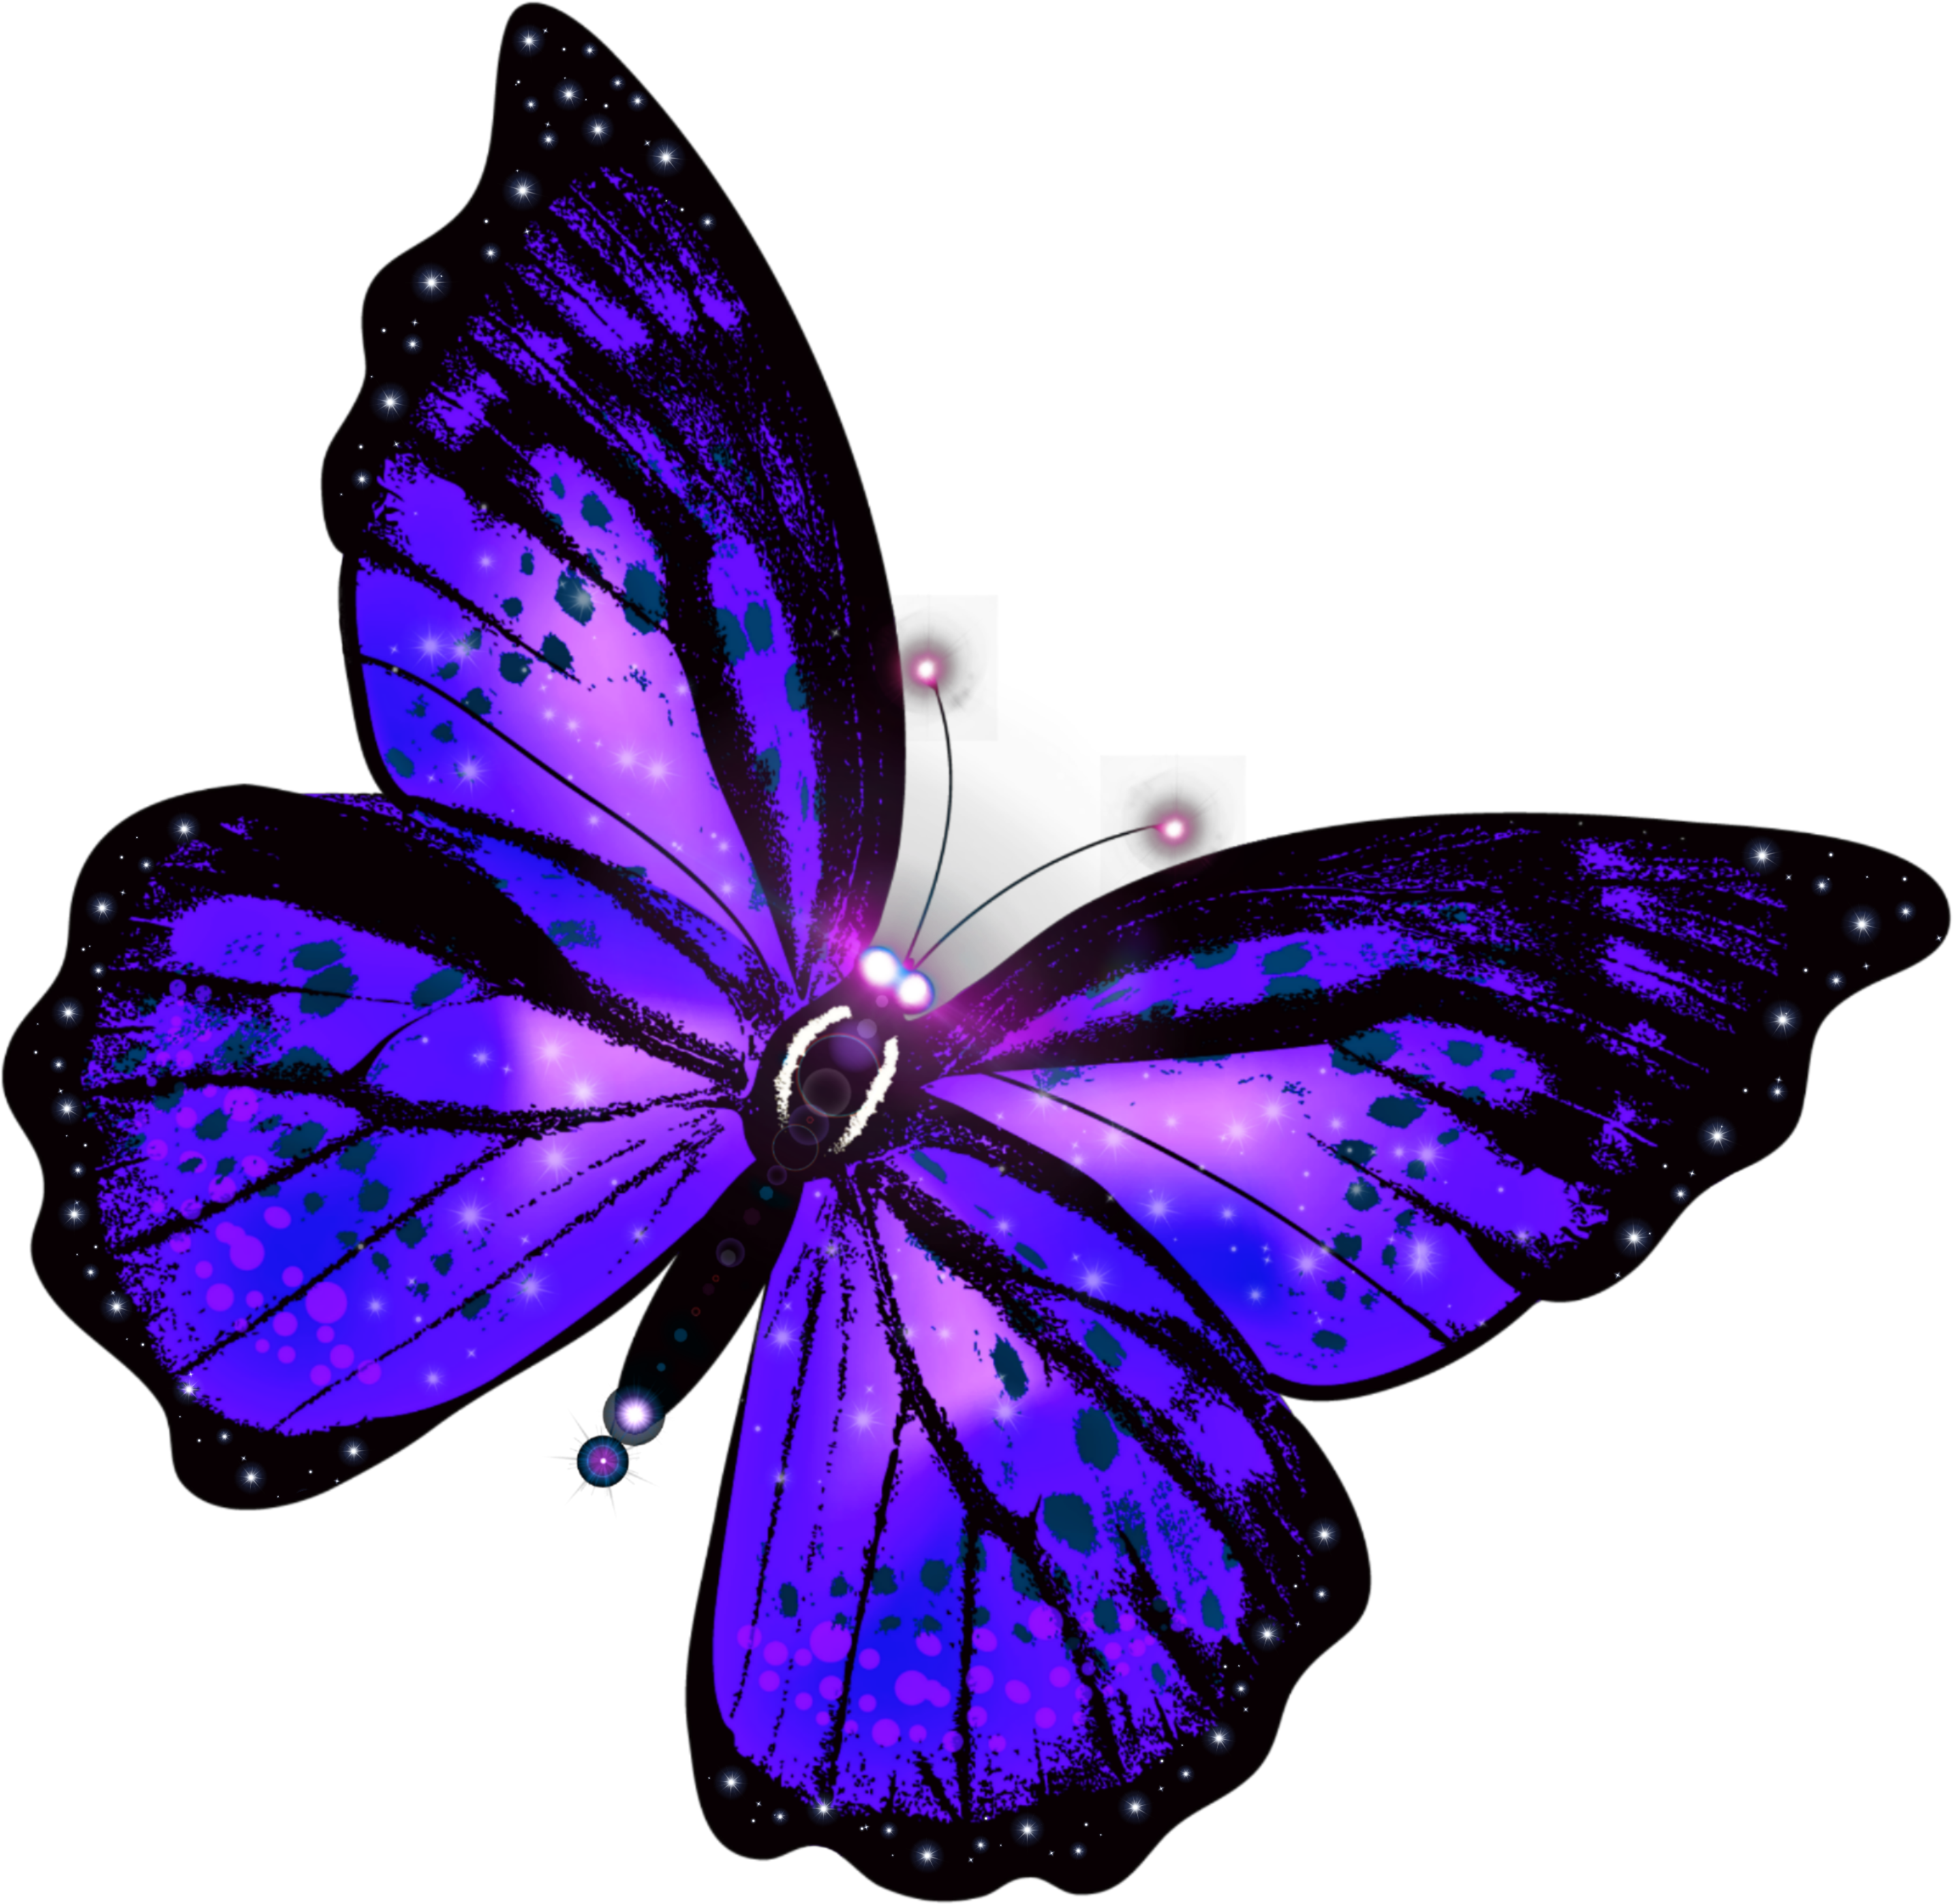 Vibrant Purple Butterfly Illustration PNG image